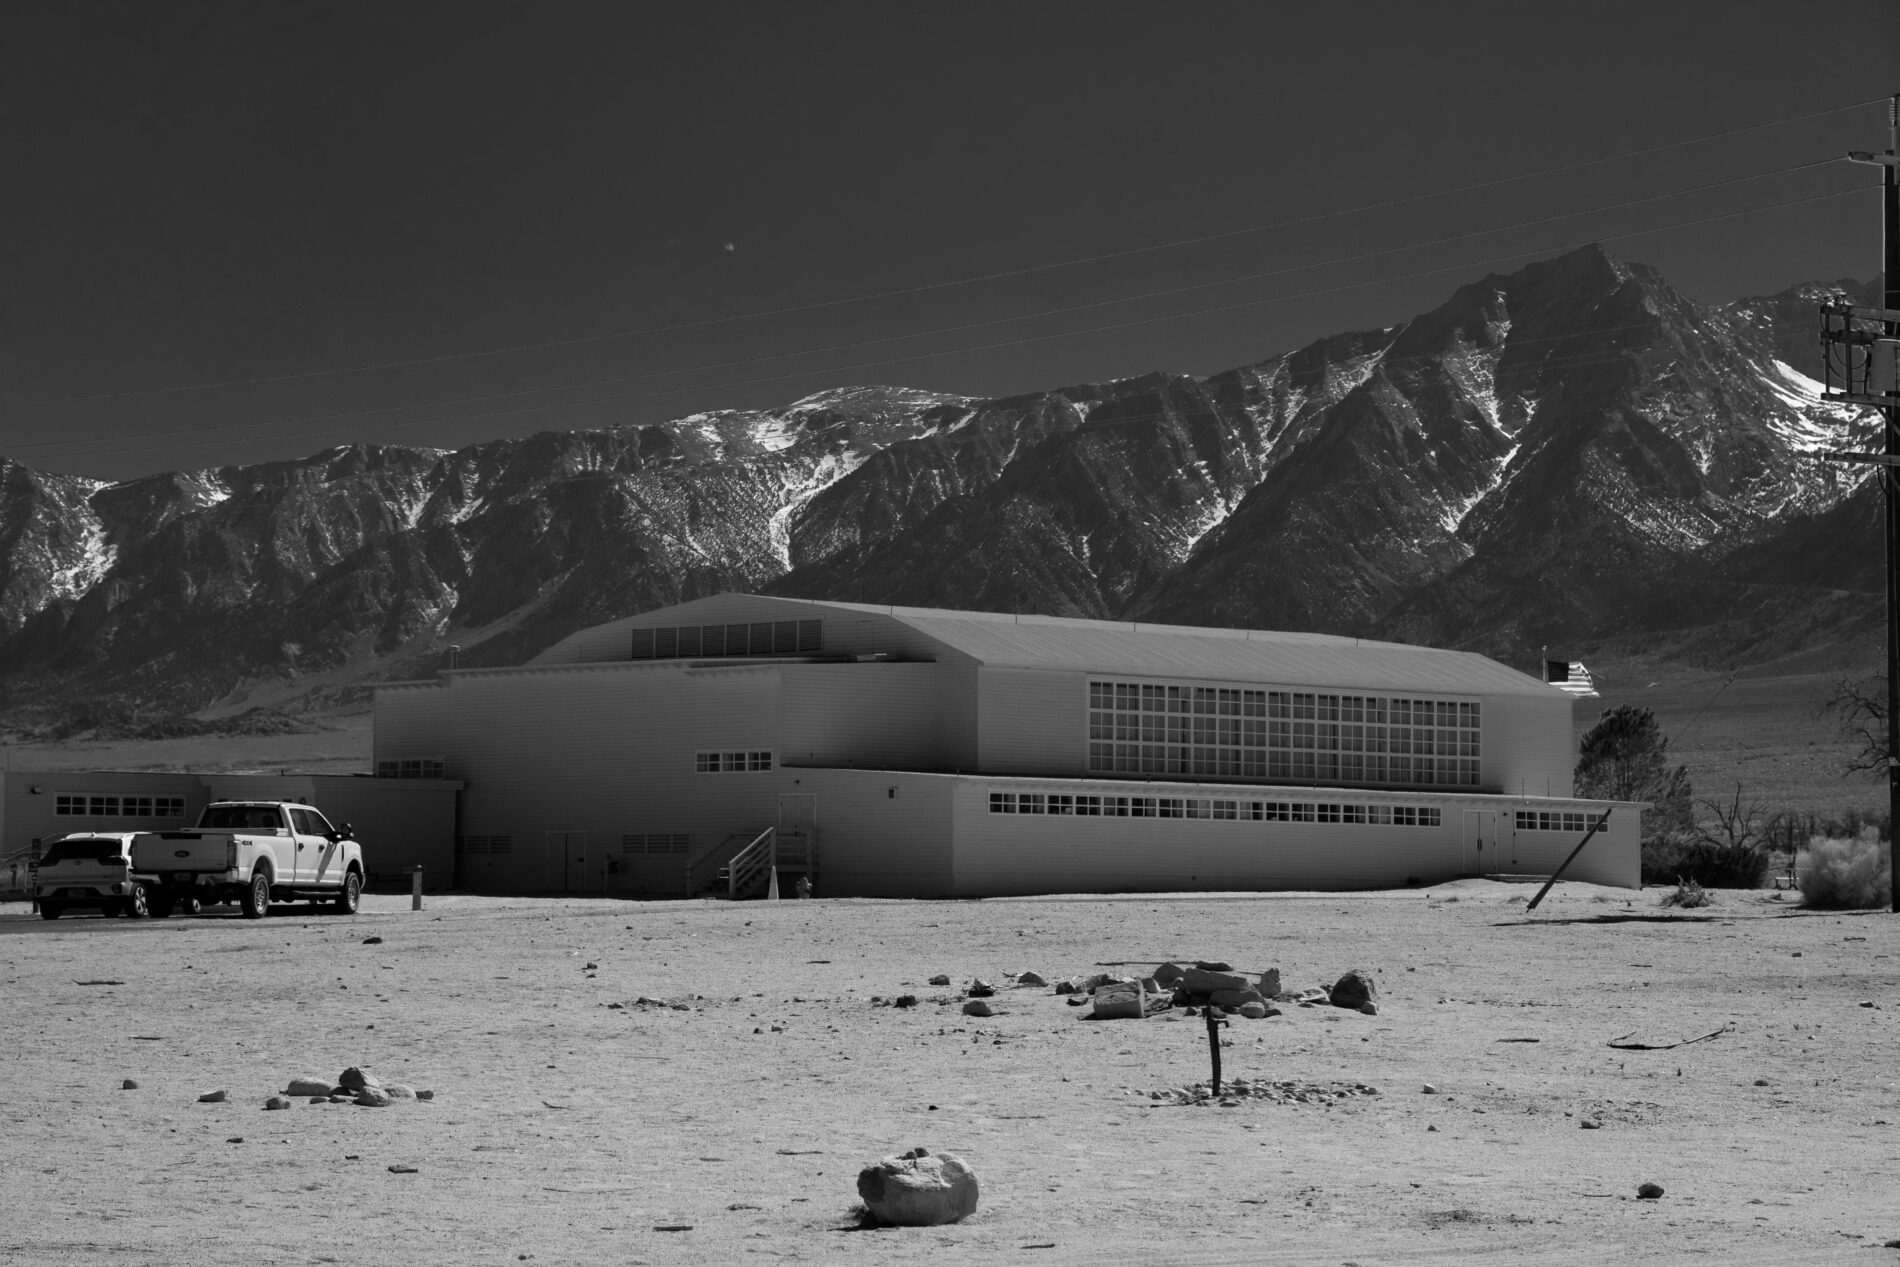 The old gym is now the Manzanar Visitor Center, your first stop at the site.